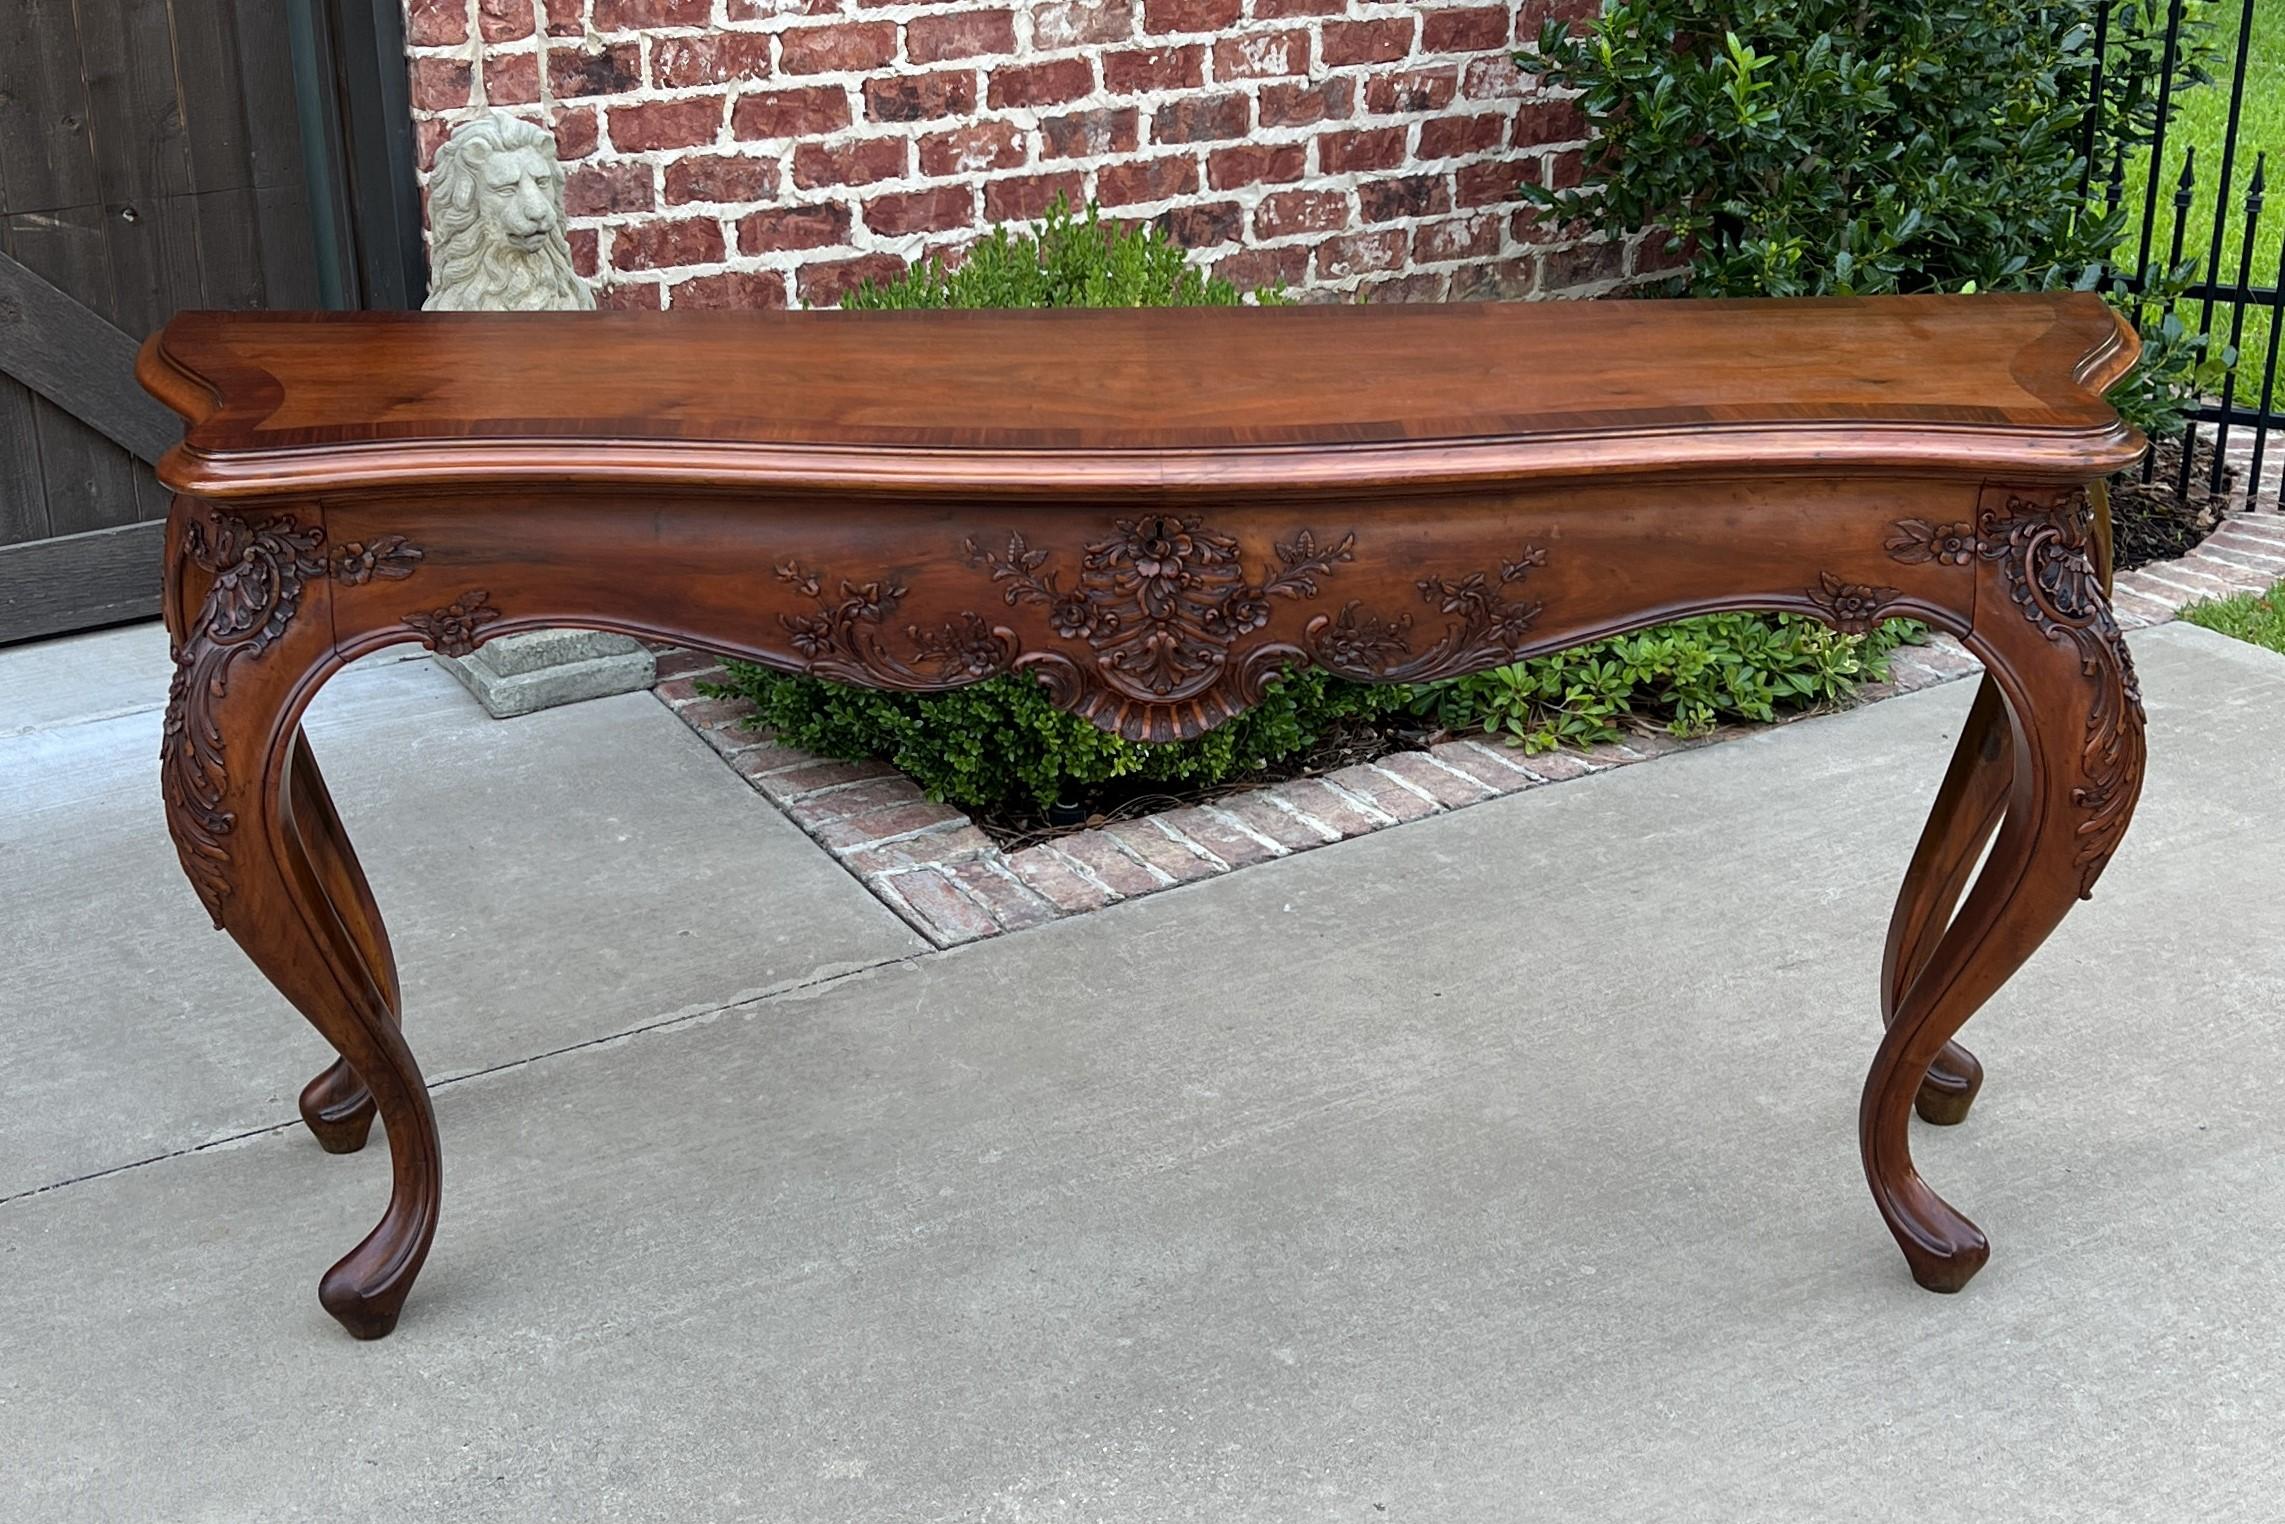 EXQUISITE Antique French Louis XV Style Mahogany WIDE Console, Sofa Table, Entry Hall or Foyer Table with Drawer~~77